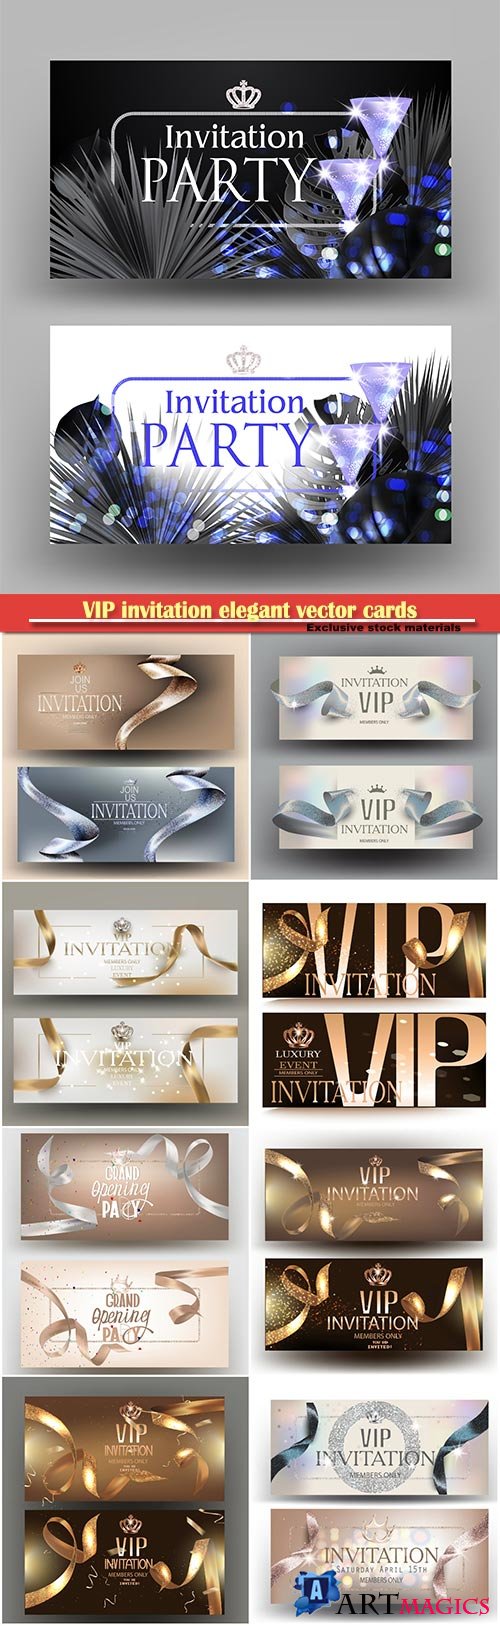 VIP invitation elegant vector cards with ribbons and pearl background